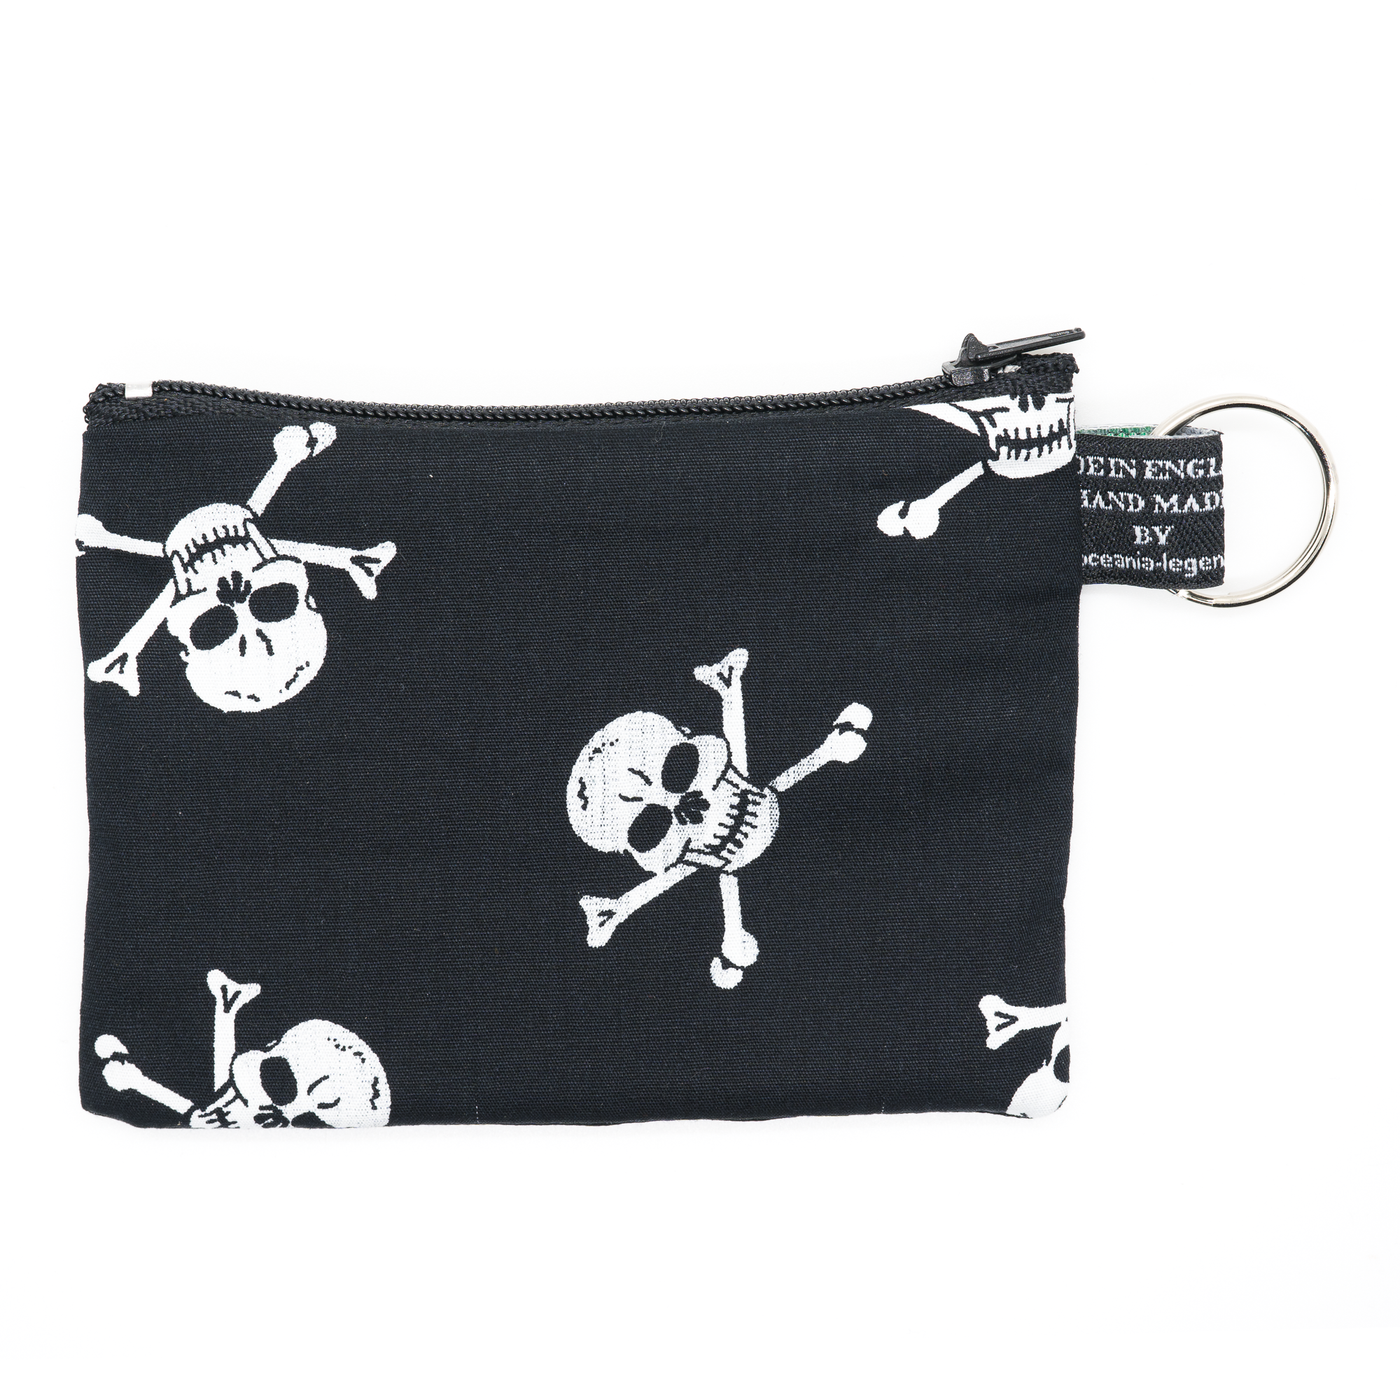 Skull & Crossbones Black & White cotton zipped purse for coins & cards with optional RFID protection